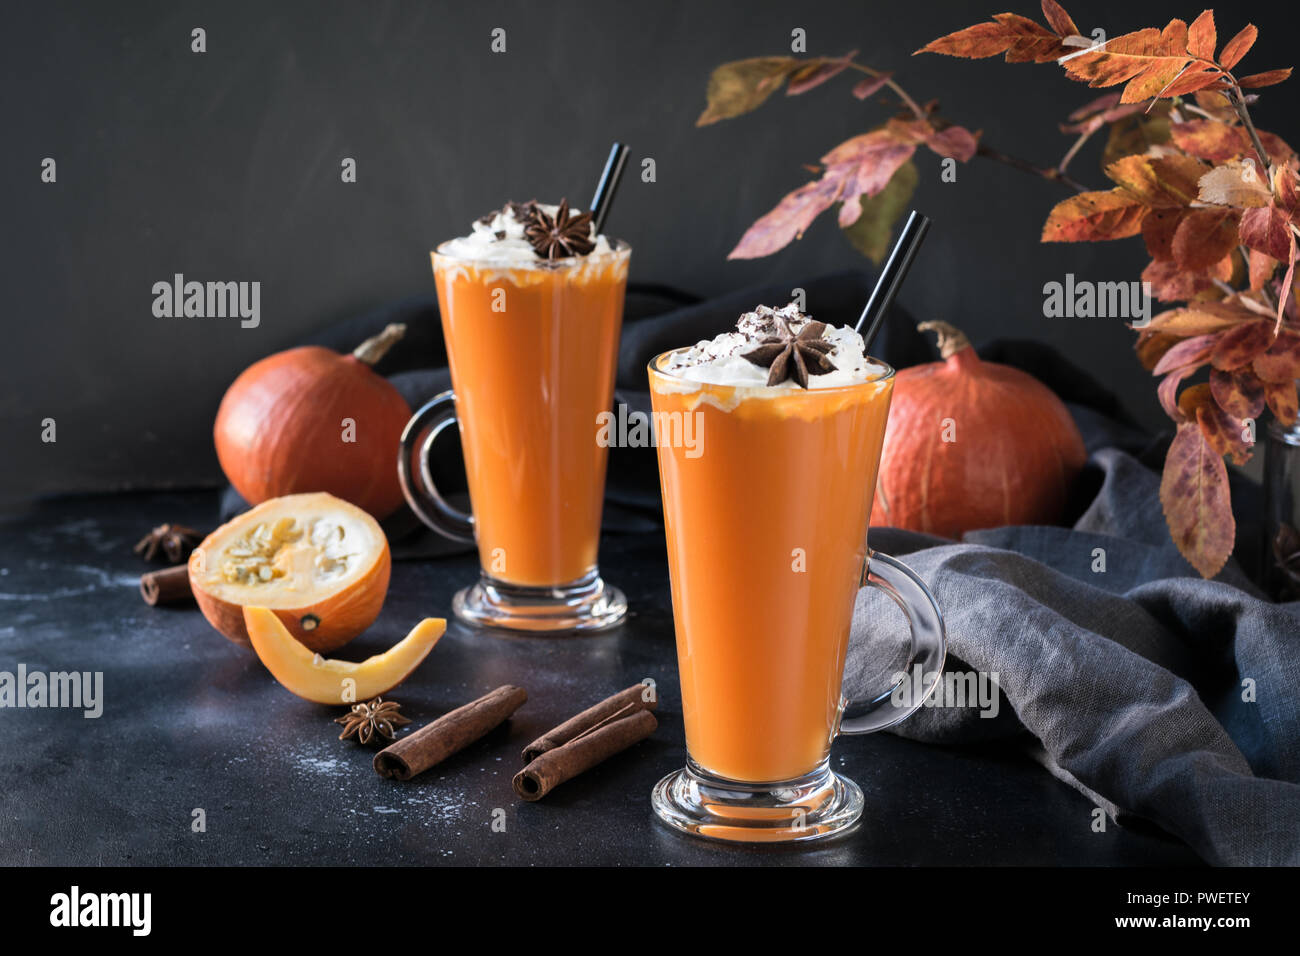 Fresh pumpkin smoothie or juice on dark. Autumn, fall or winter hot drink. Cozy healthy beverage. Stock Photo